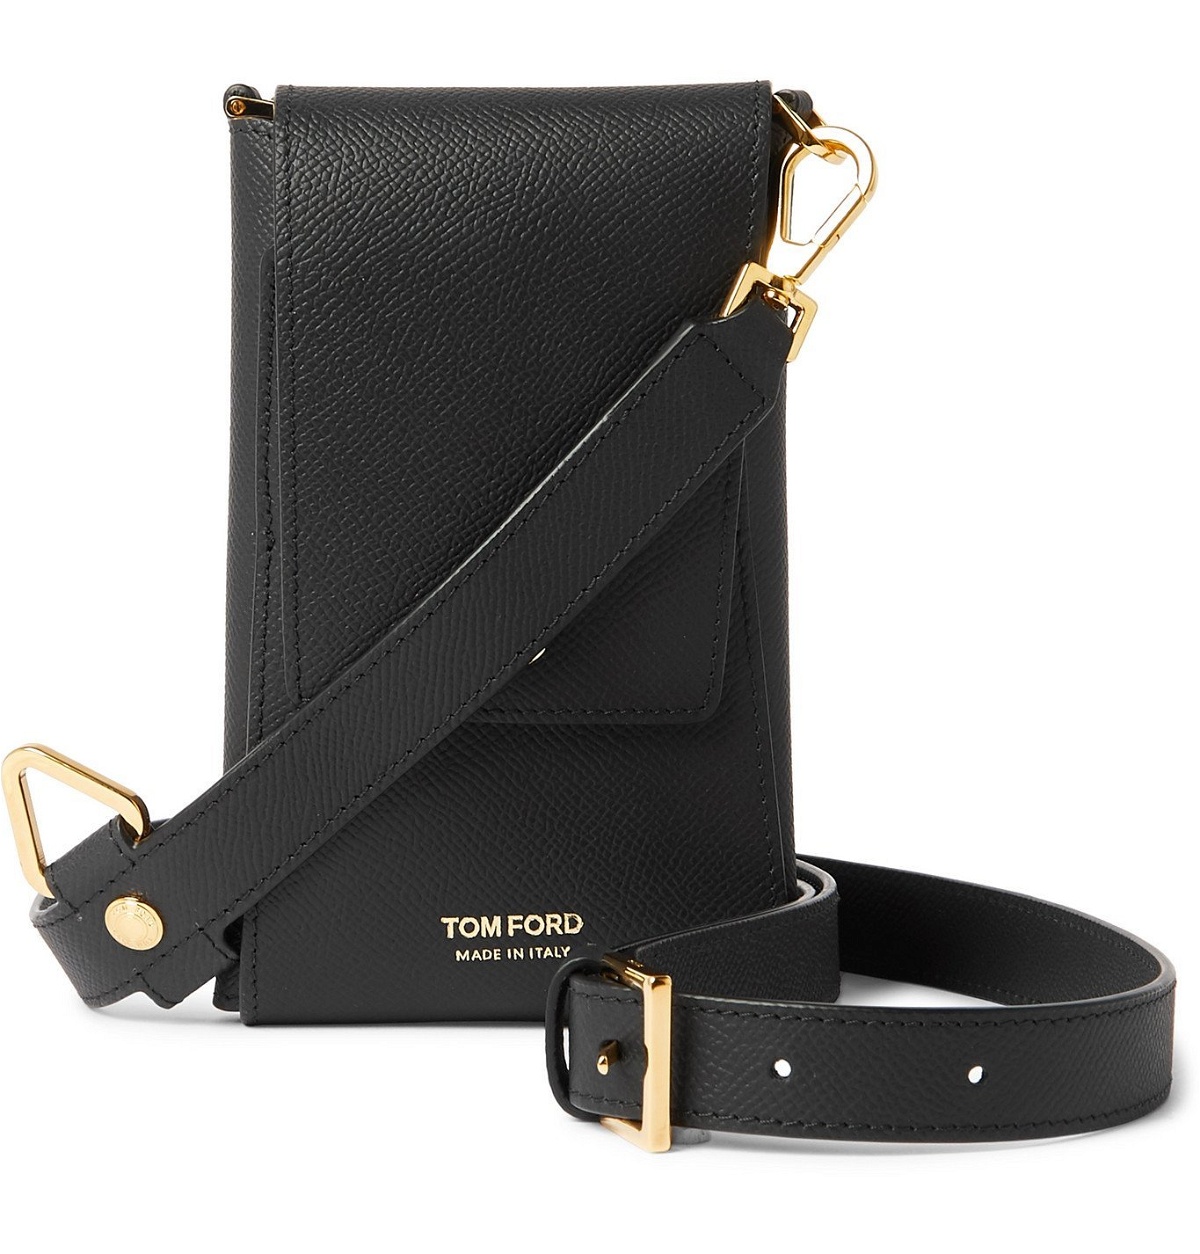 TOM FORD - Full-Grain Leather Phone Pouch - Black TOM FORD